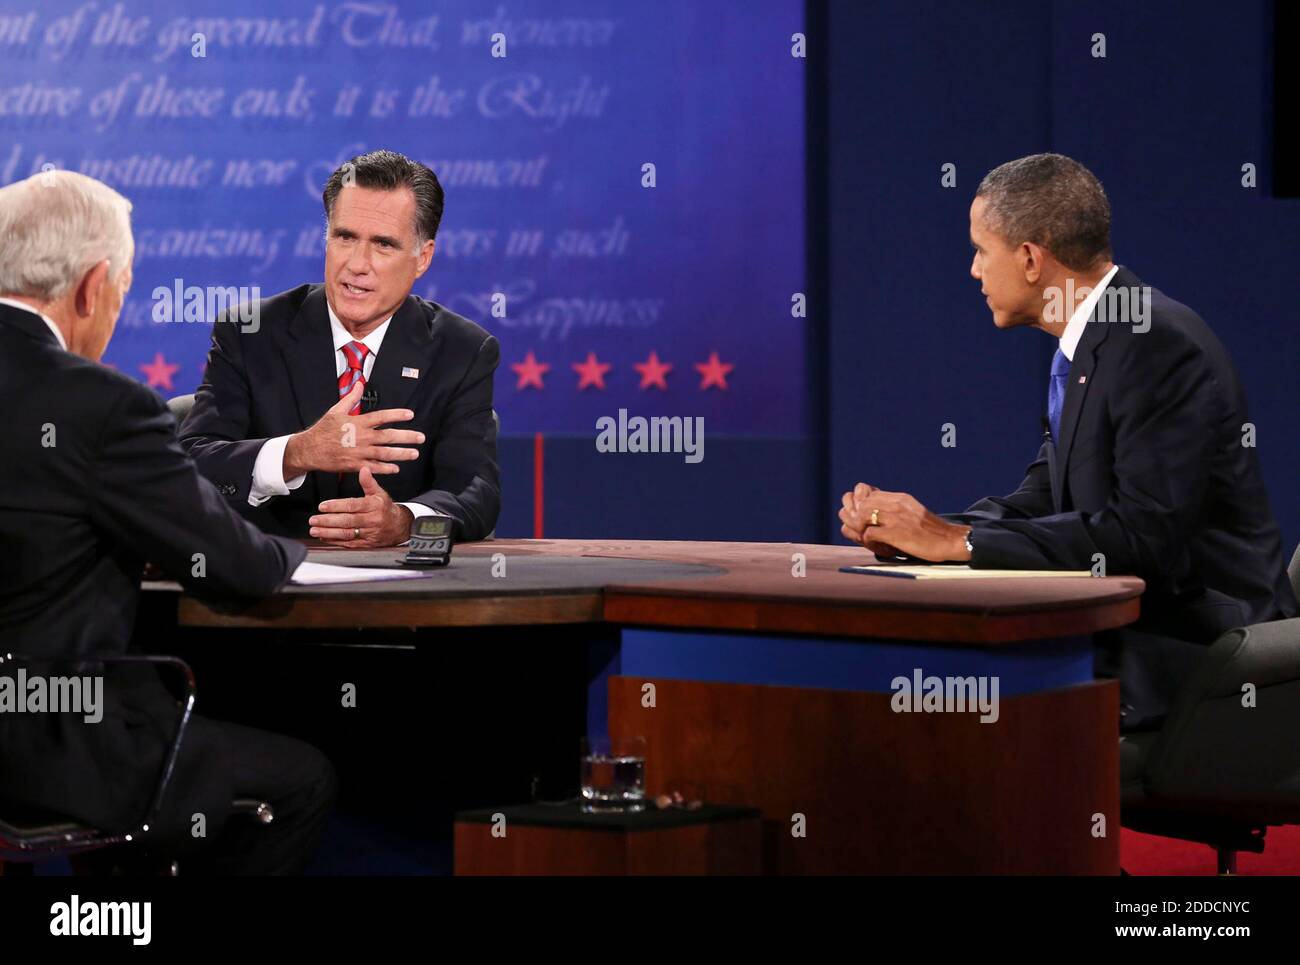 NO FILM, NO VIDEO, NO TV, NO DOCUMENTARY - Republican presidential nominee Mitt Romney, left, speaks during a presidential debate with President Barack Obama speaks at Lynn University in Boca Raton, Florida, USA, on Monday, October 22, 2012. Bob Schieffer is the moderator. Photo by Richard Graulich/Palm Beach Post/MCT/ABACAPRESS.COM Stock Photo